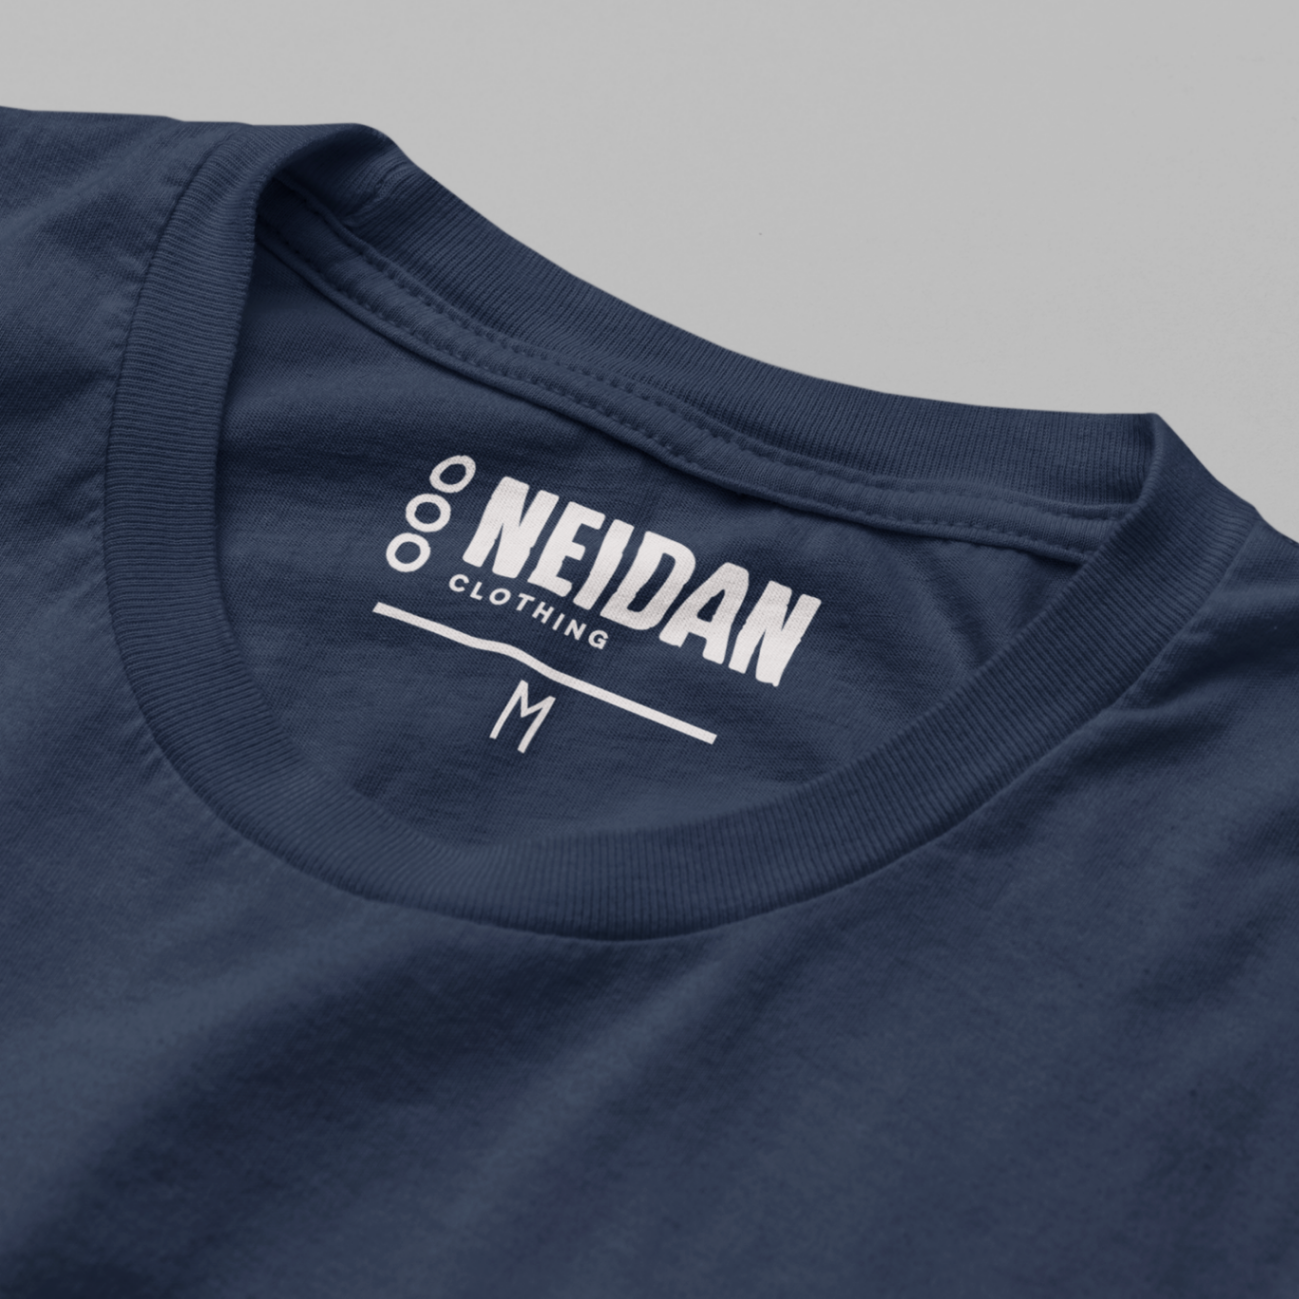 closeup of a navy t shirt neck label with neidan clothing logo